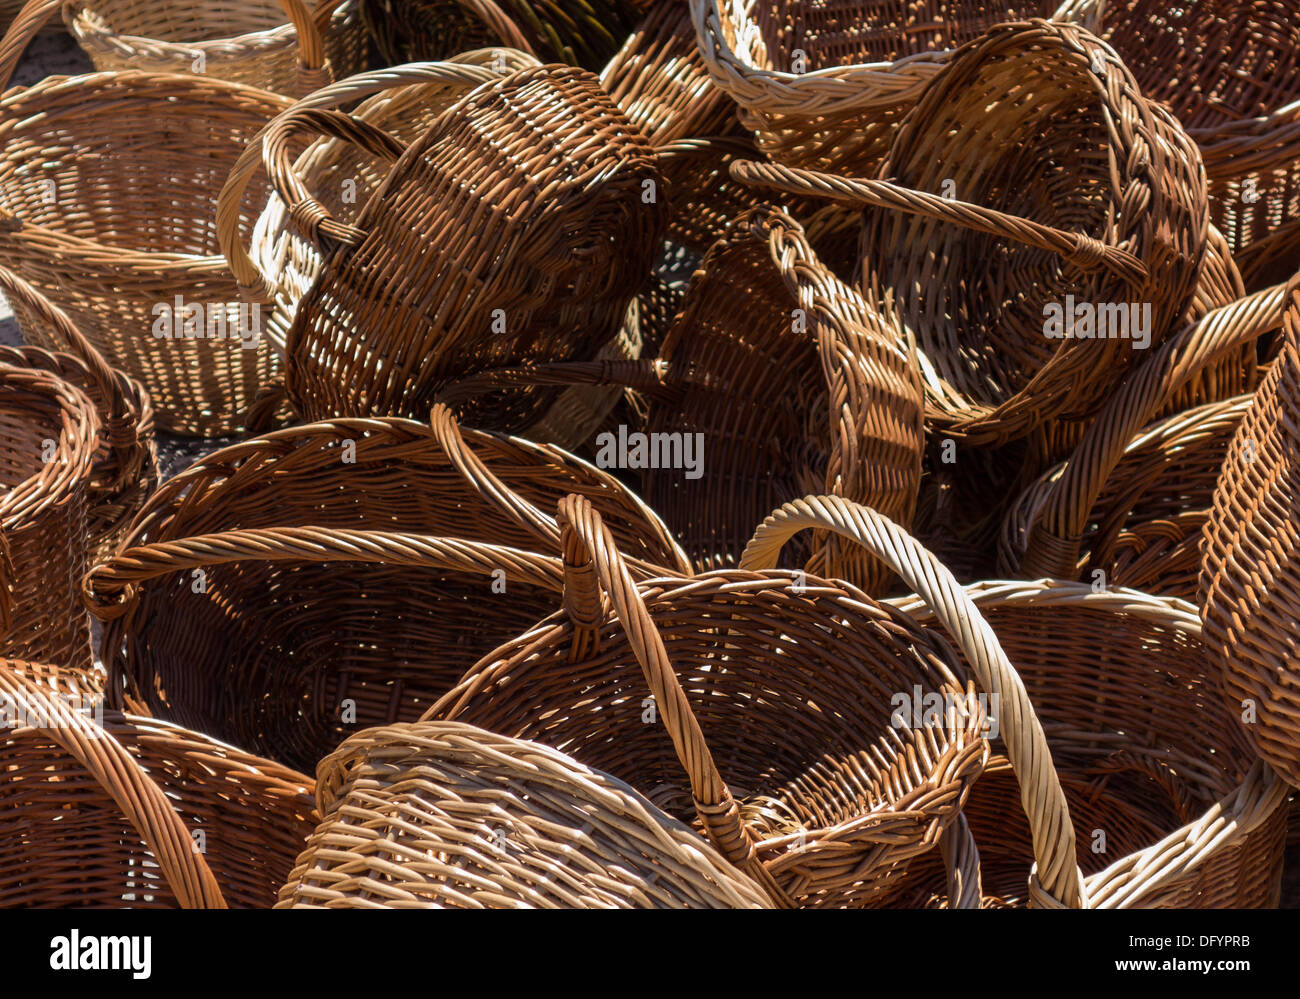 Pile of Baskets for sale Stock Photo